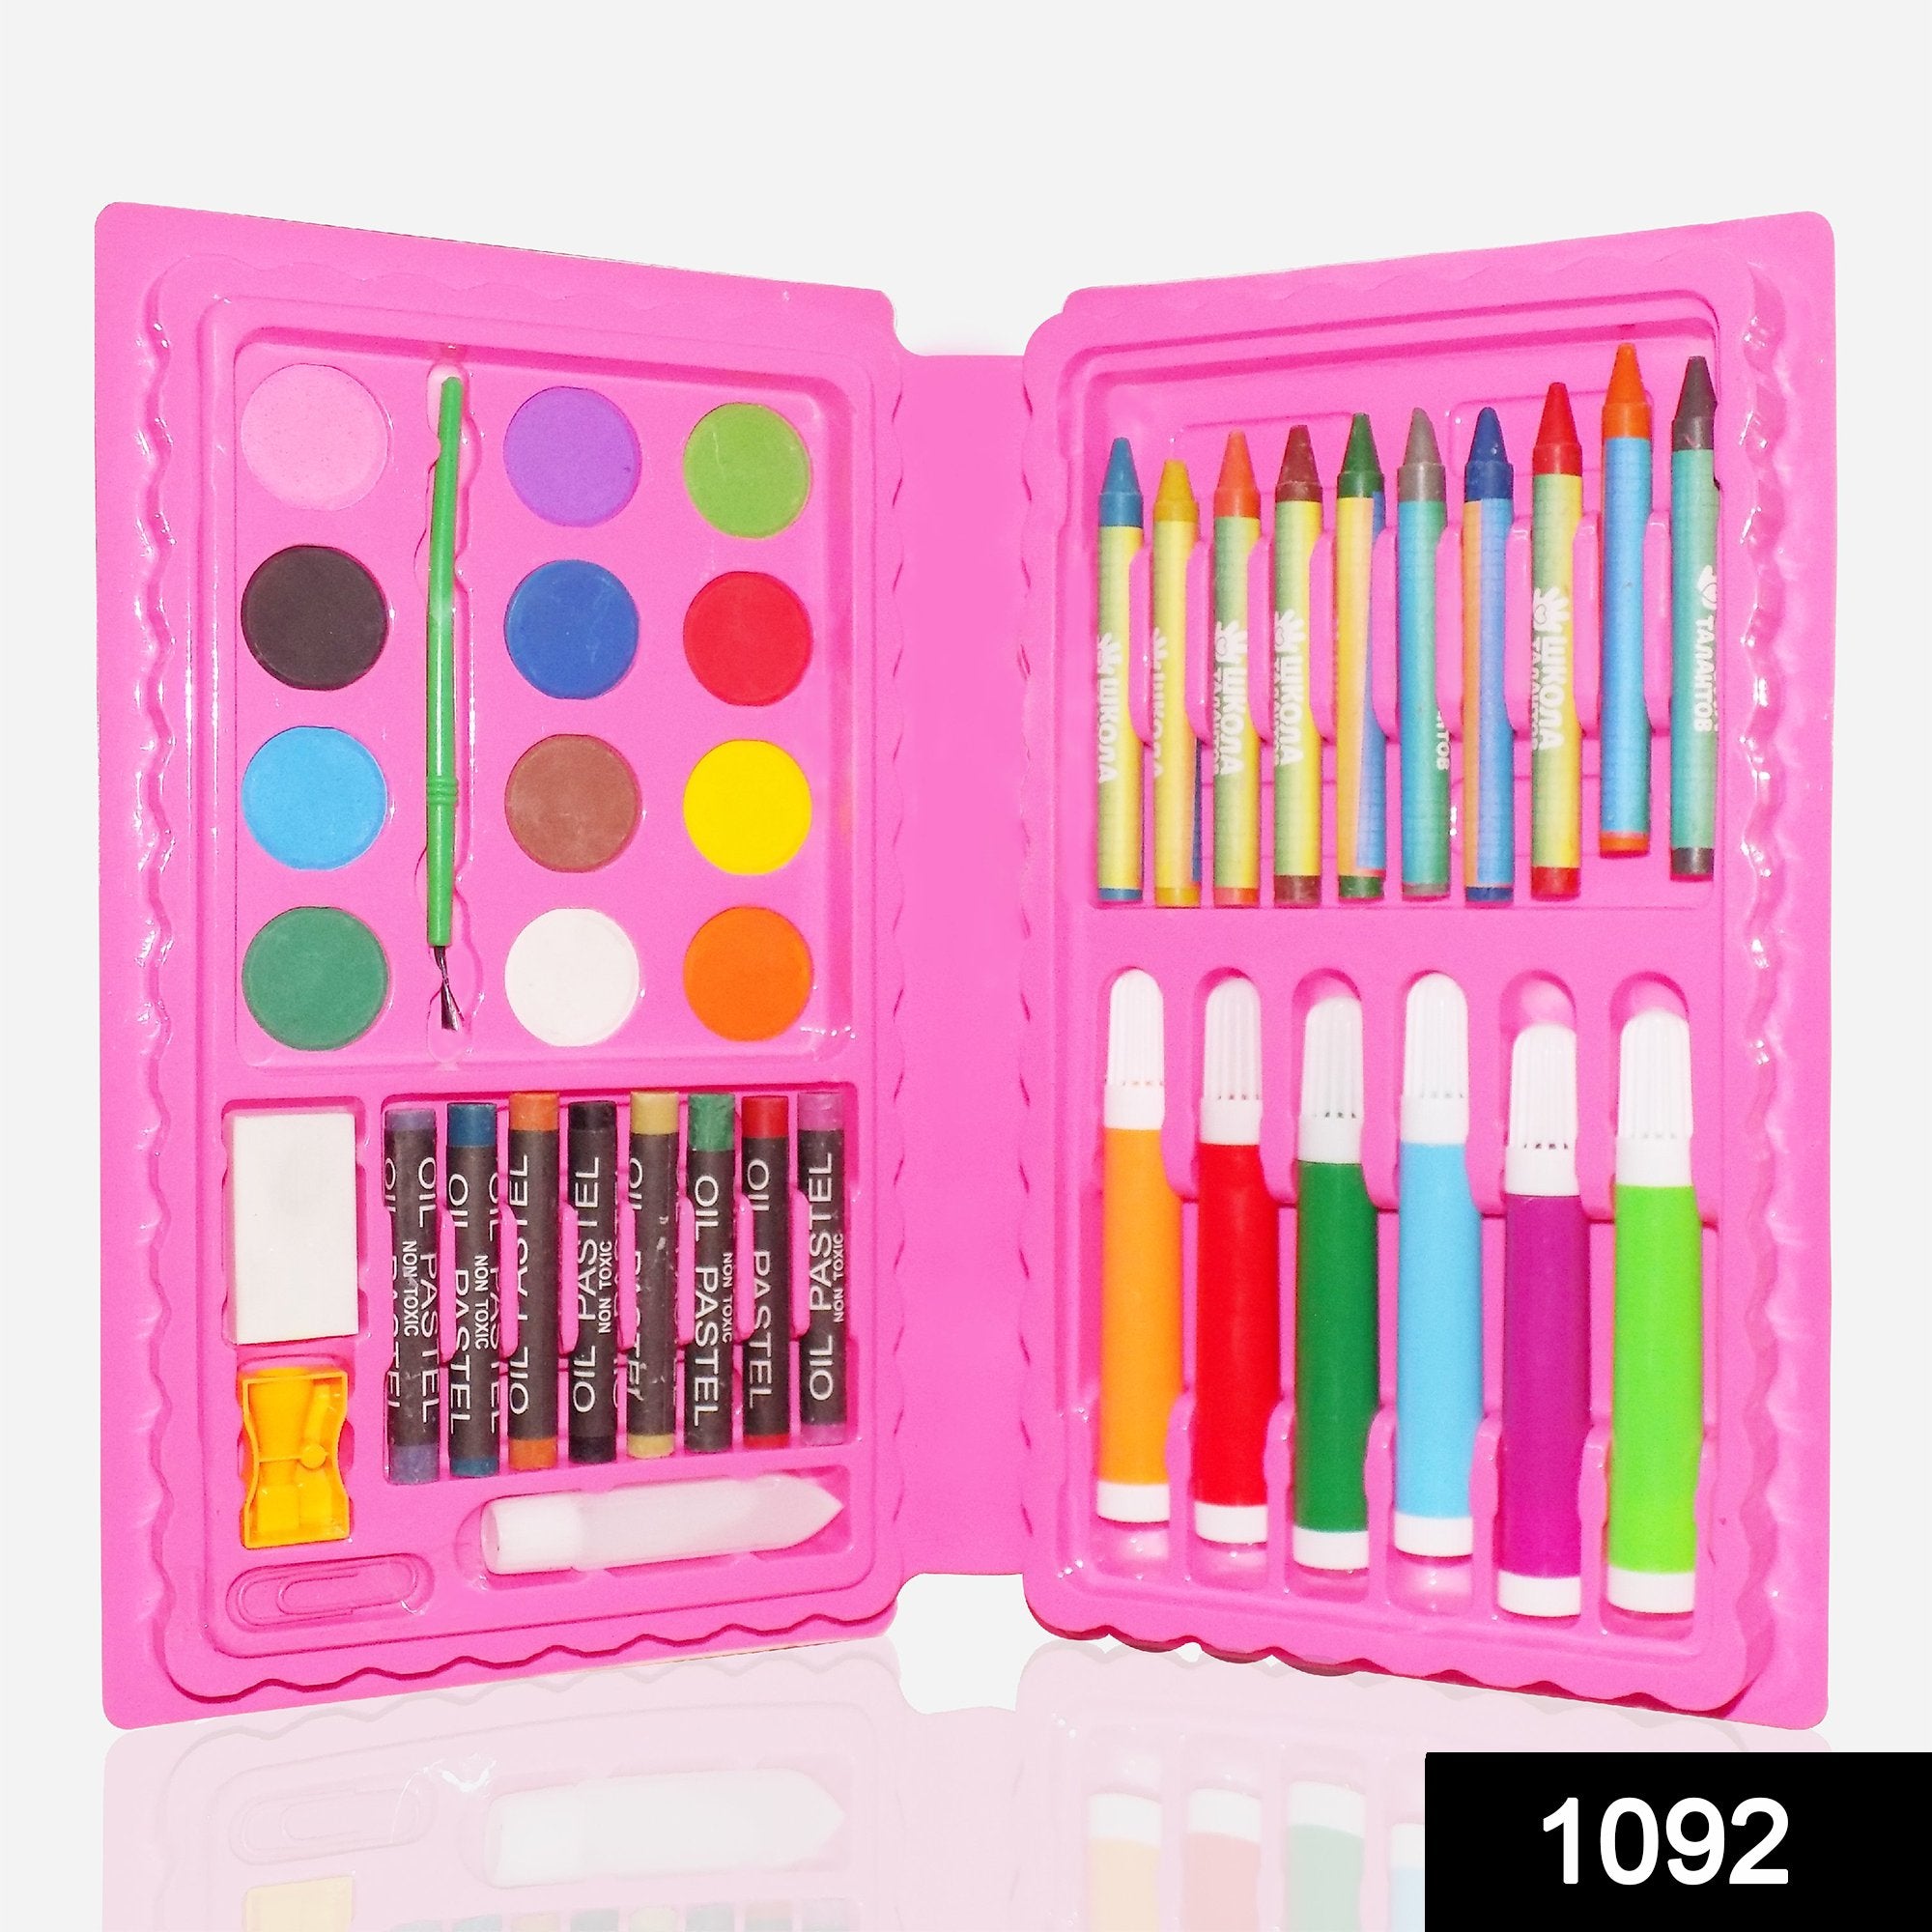 1092 Art and Craft Color Kit (Crayons, Water Color, Sketch Pens) - 42 Pcs - SkyShopy